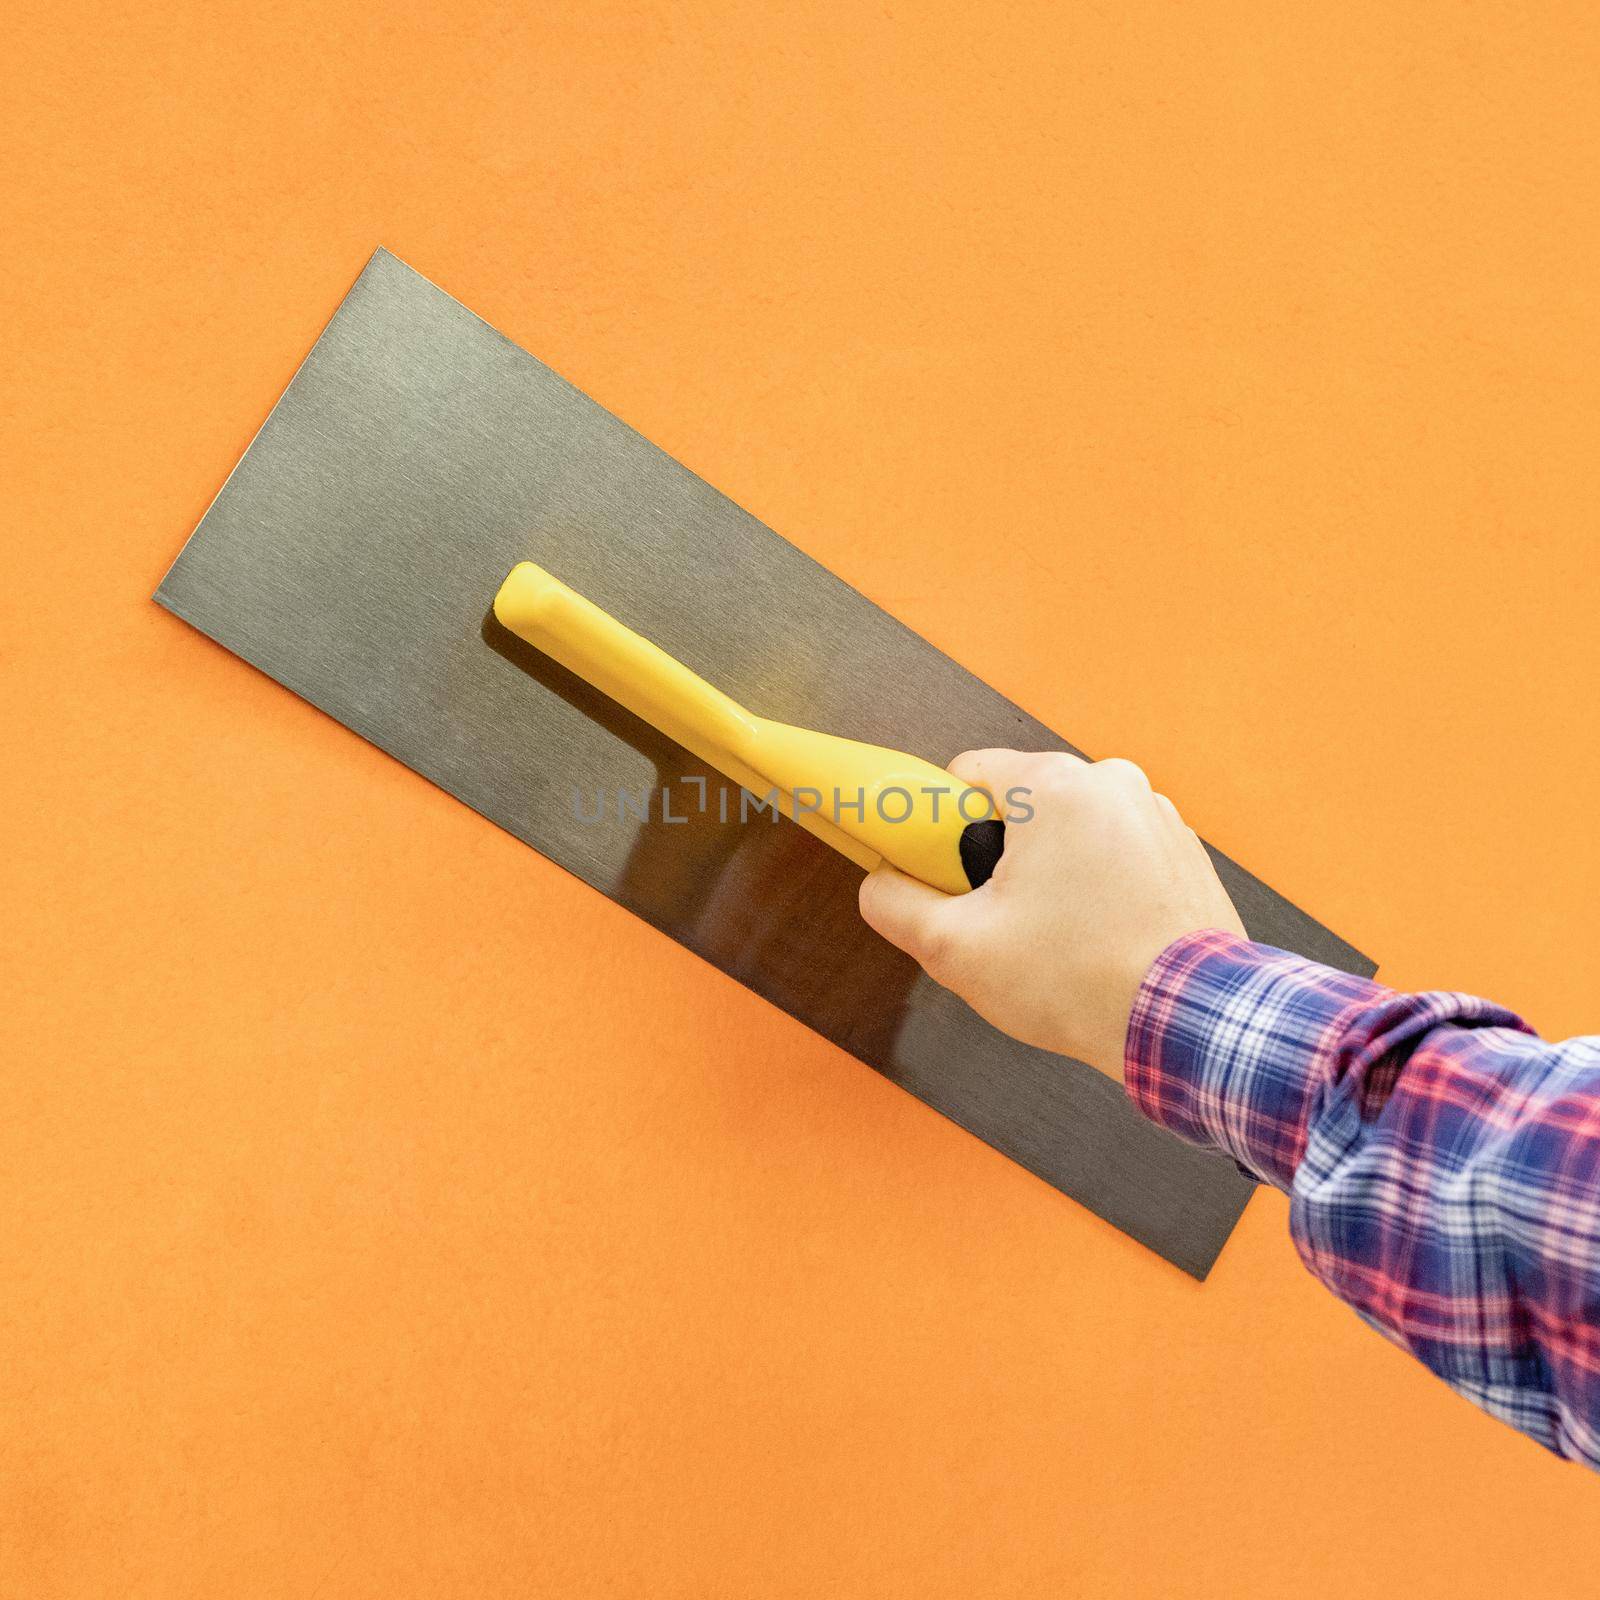 Drywall Trowel tool on a isolated background